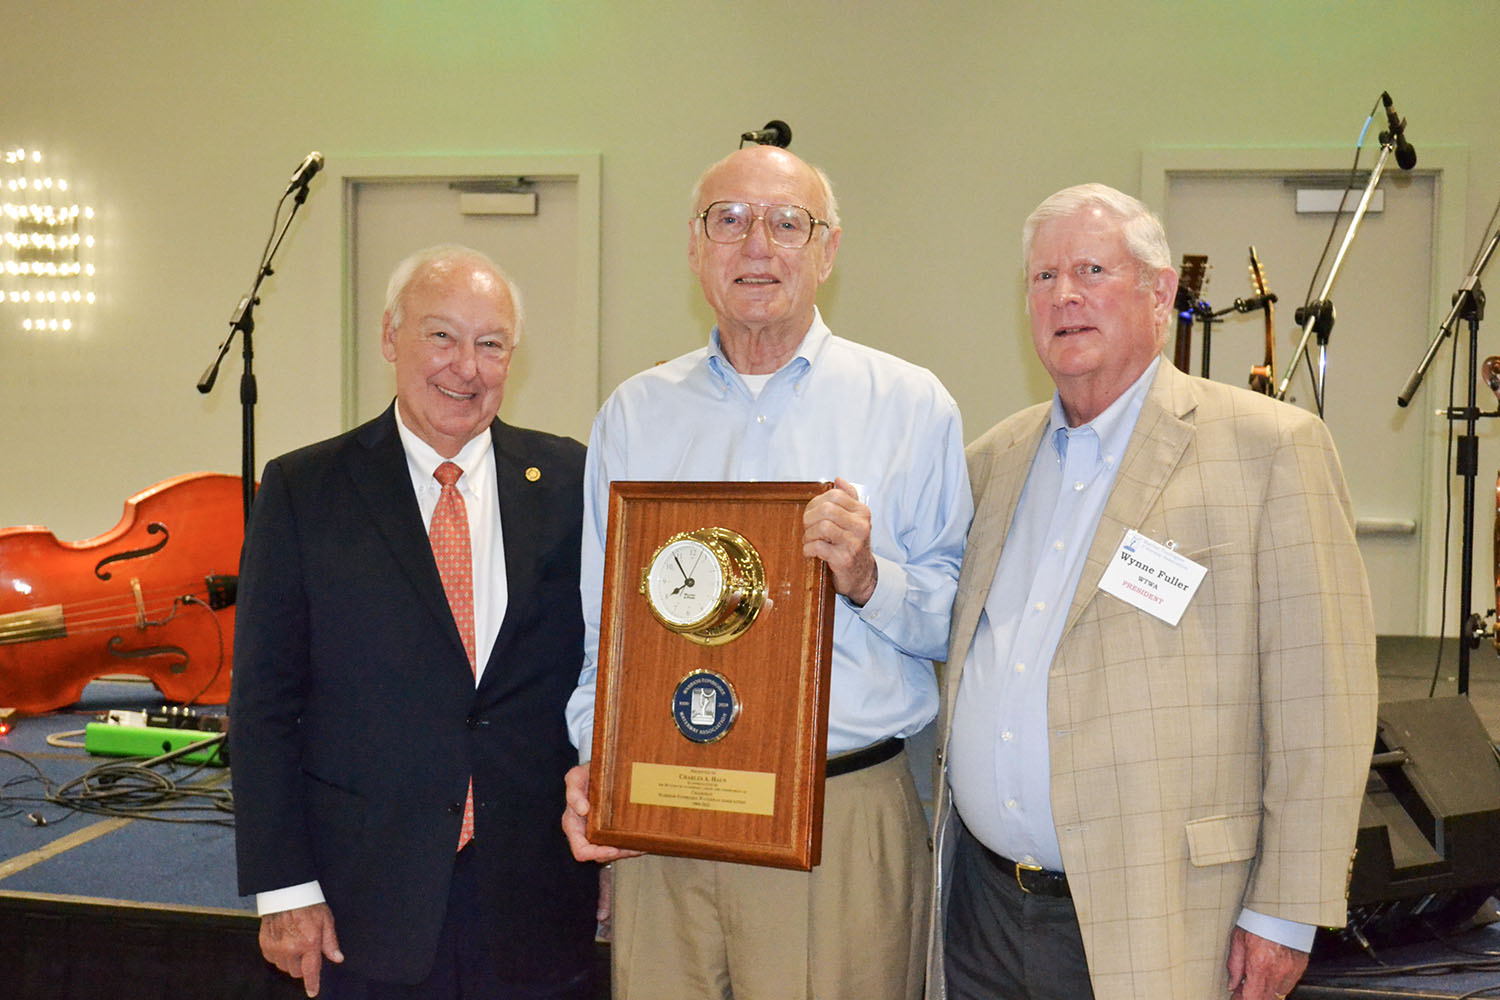 Charlie Haun, center, was honored for his 28 years of service as chairman of the Warrior-Tombigbee Waterway Association during the association's annual meeting. With him are Horace Horn, current chairman, and Wynne Fuller, president of the association. (Photo courtesy of WTWA)